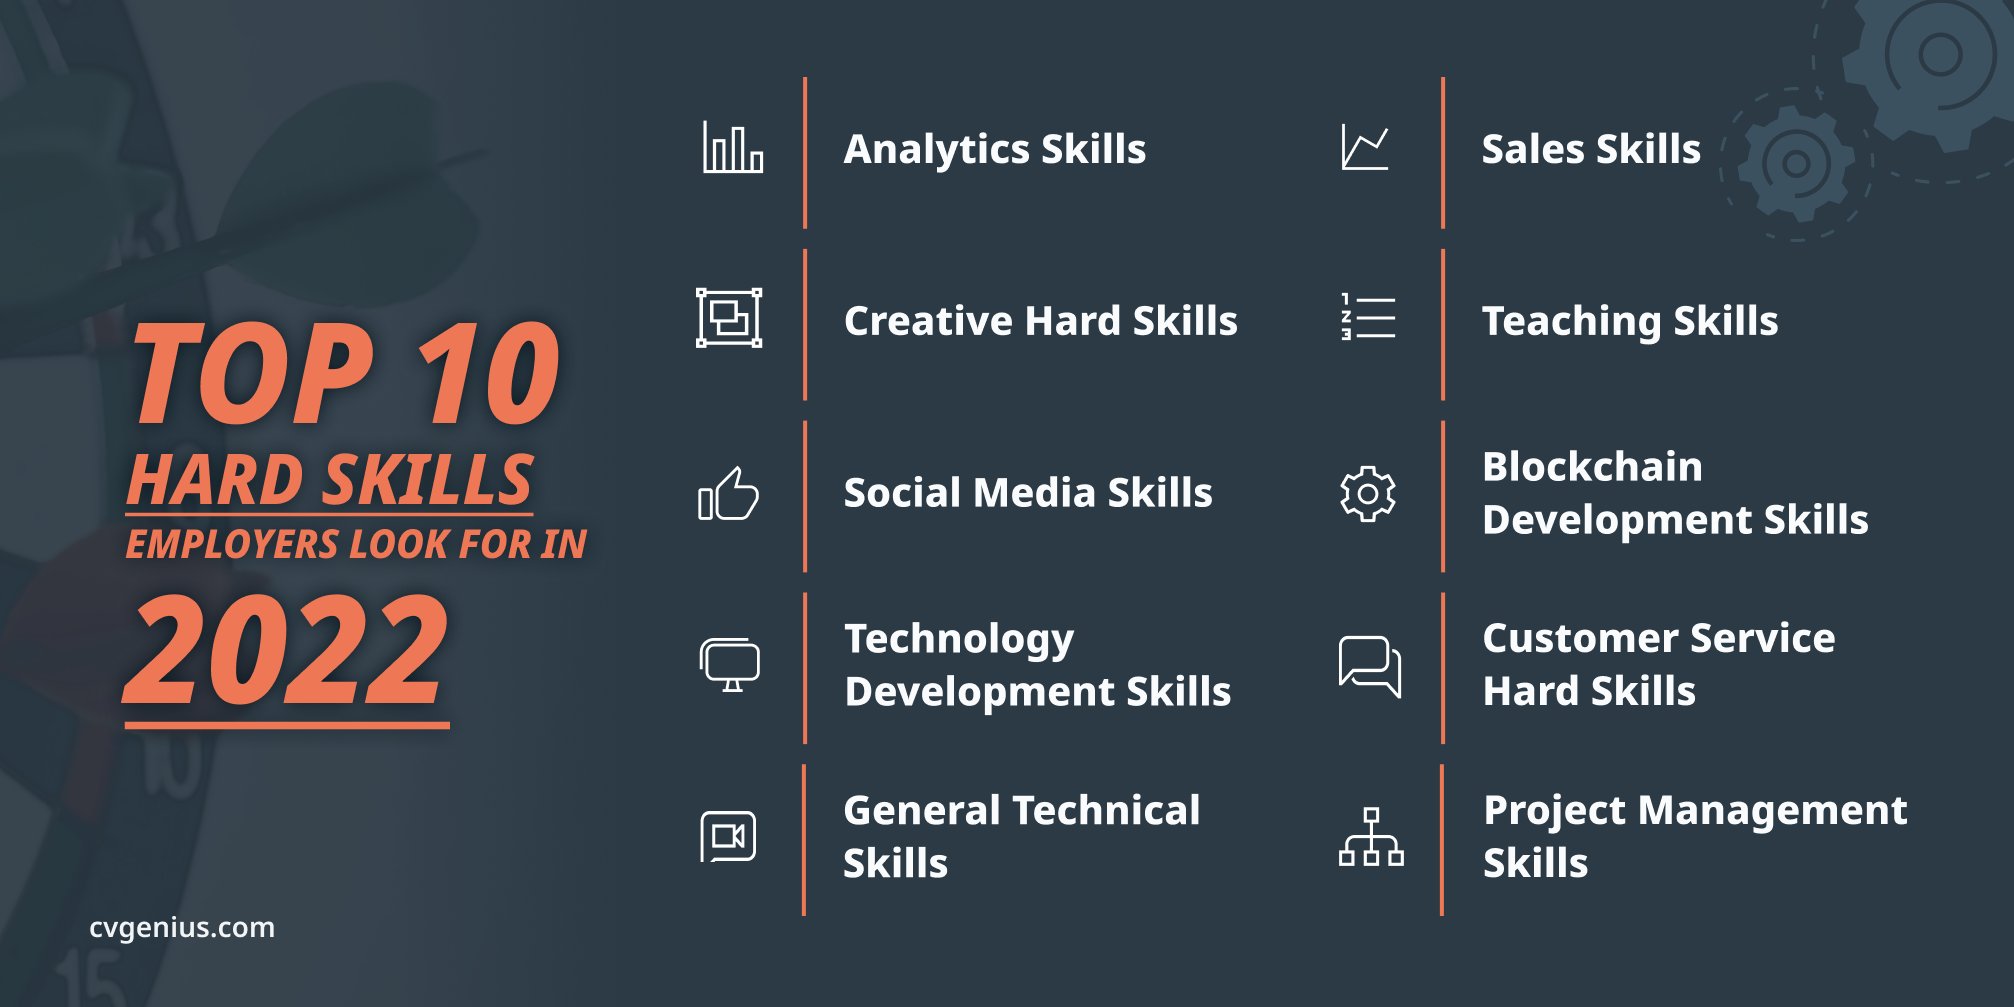 Cape bogstaveligt talt maskine TheCVGenius on Twitter: "If you're thinking about picking up a #hardskill  then check out our top 10 hard skills #employers look for in #2022 #skills  #jobseeking #cvgenius https://t.co/X3ImDjaqLW" / Twitter